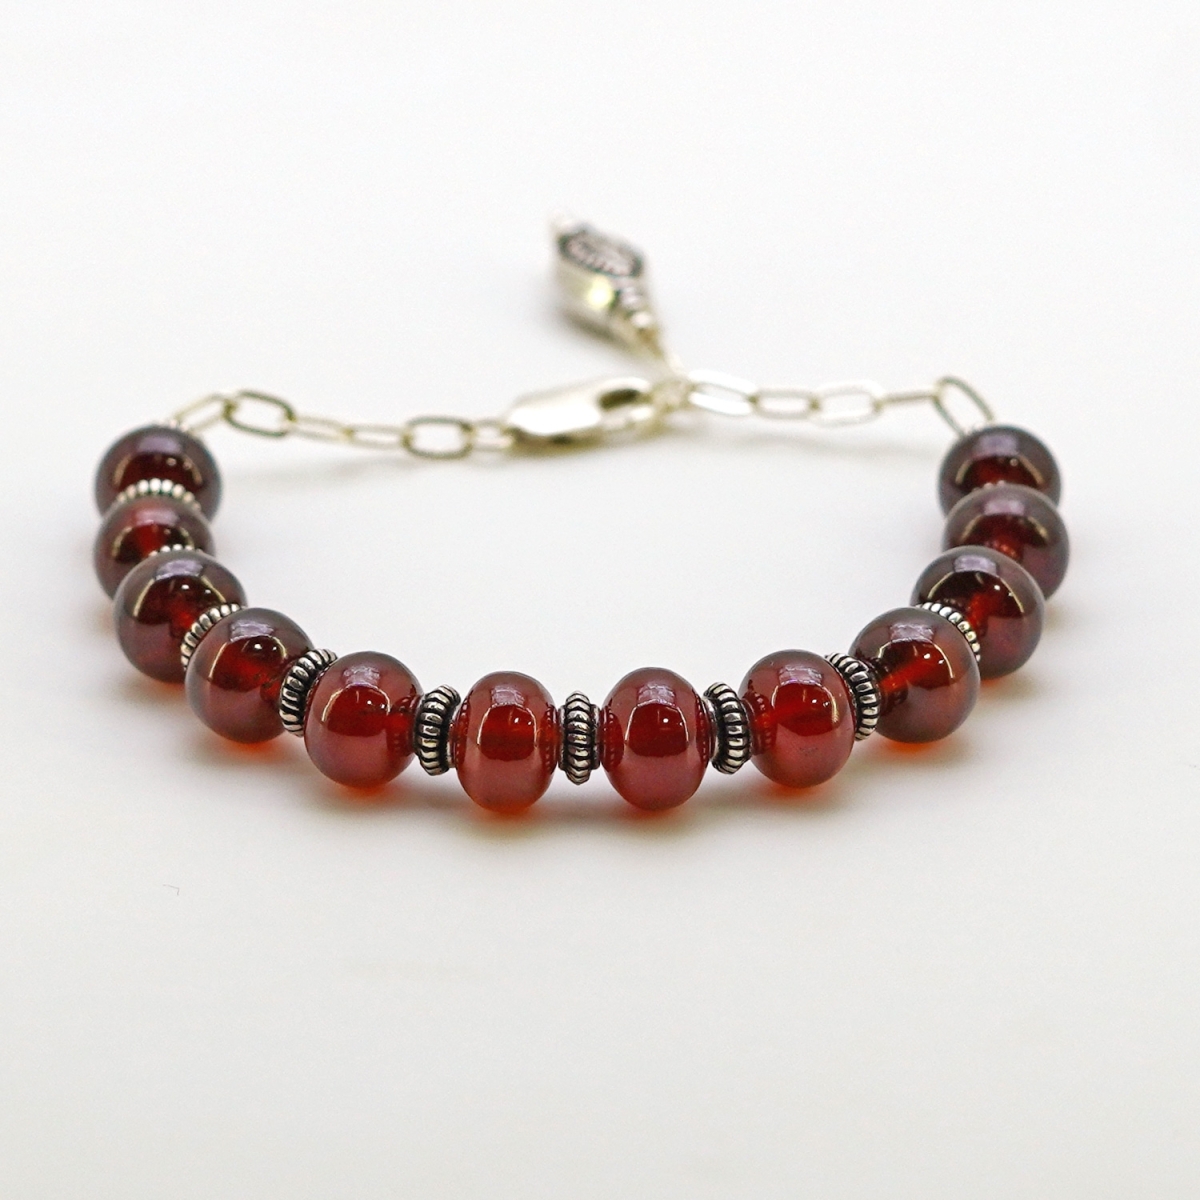 New Garnet & Sterling Silver Bangle Handcrafted India - jewelry